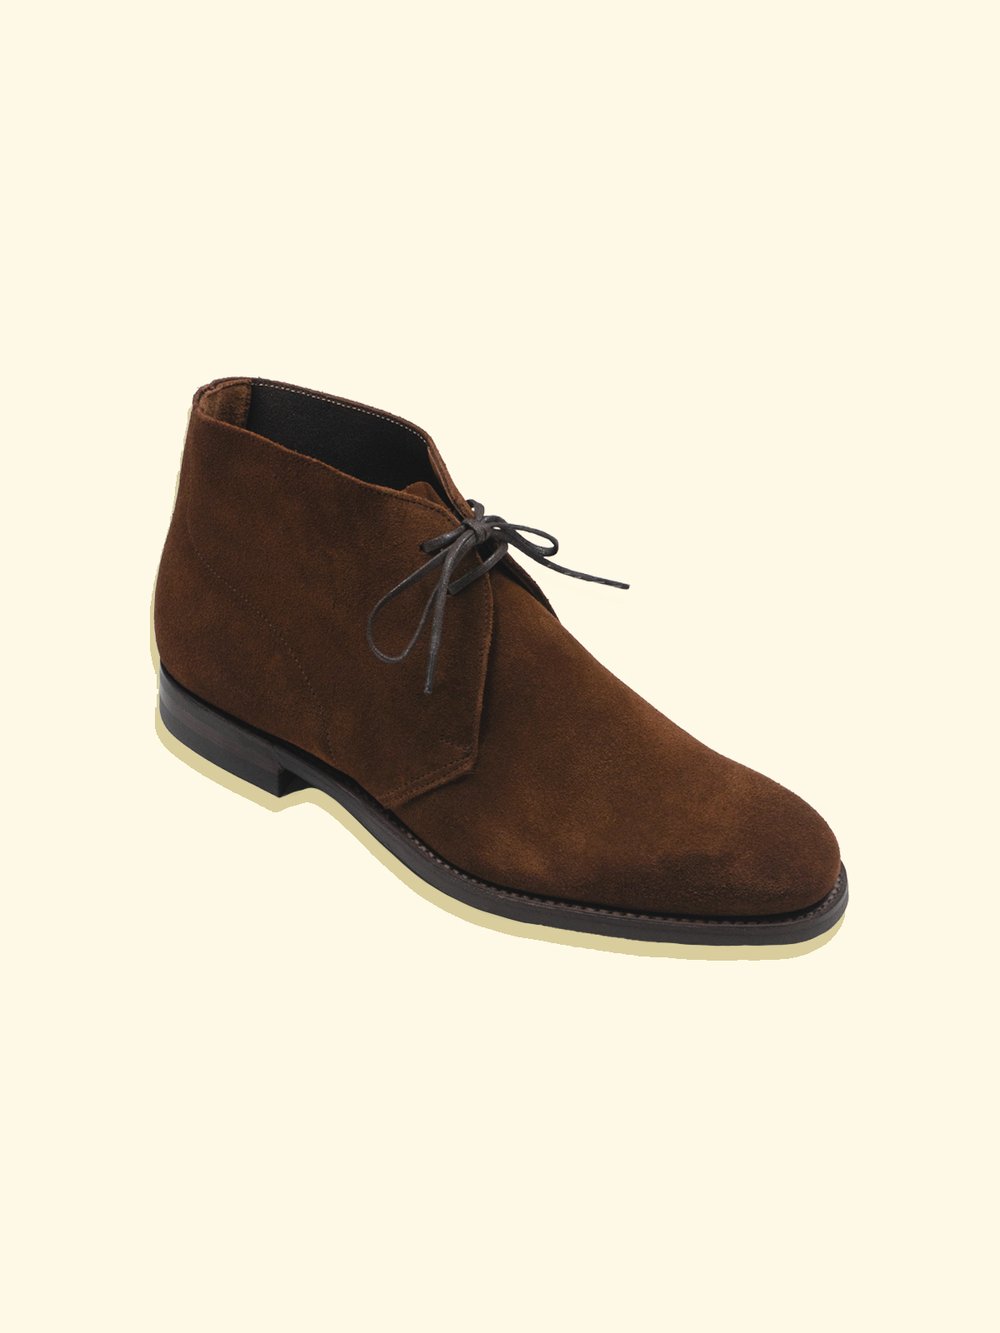 Hartford Chukka Boots by Crockett & Jones for The Anthology - Snuff Suede